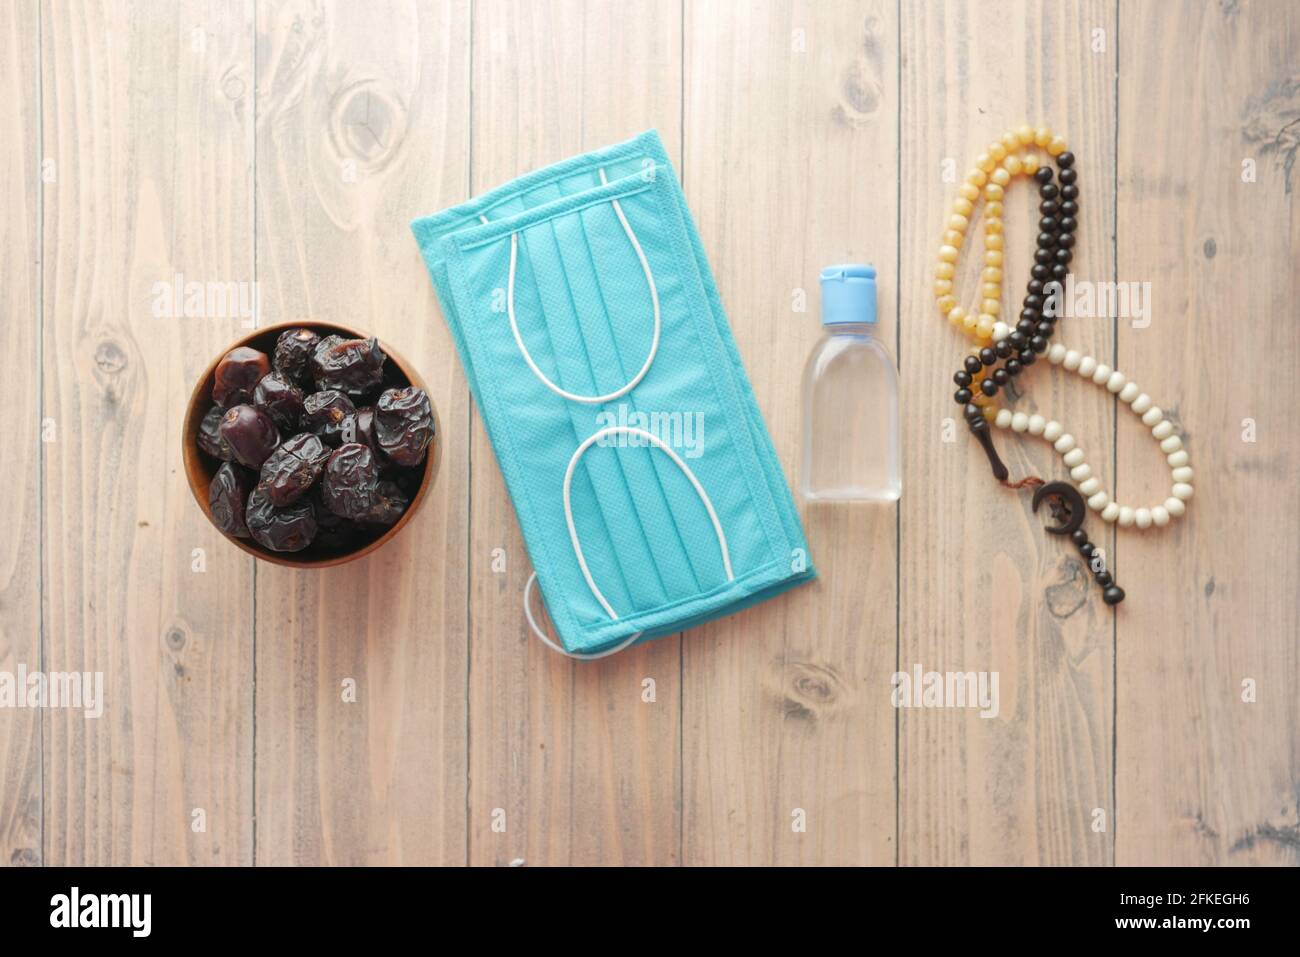 fresh date fruit in a bowl , prayer rosary , hand sanitizer and mask on floor  Stock Photo